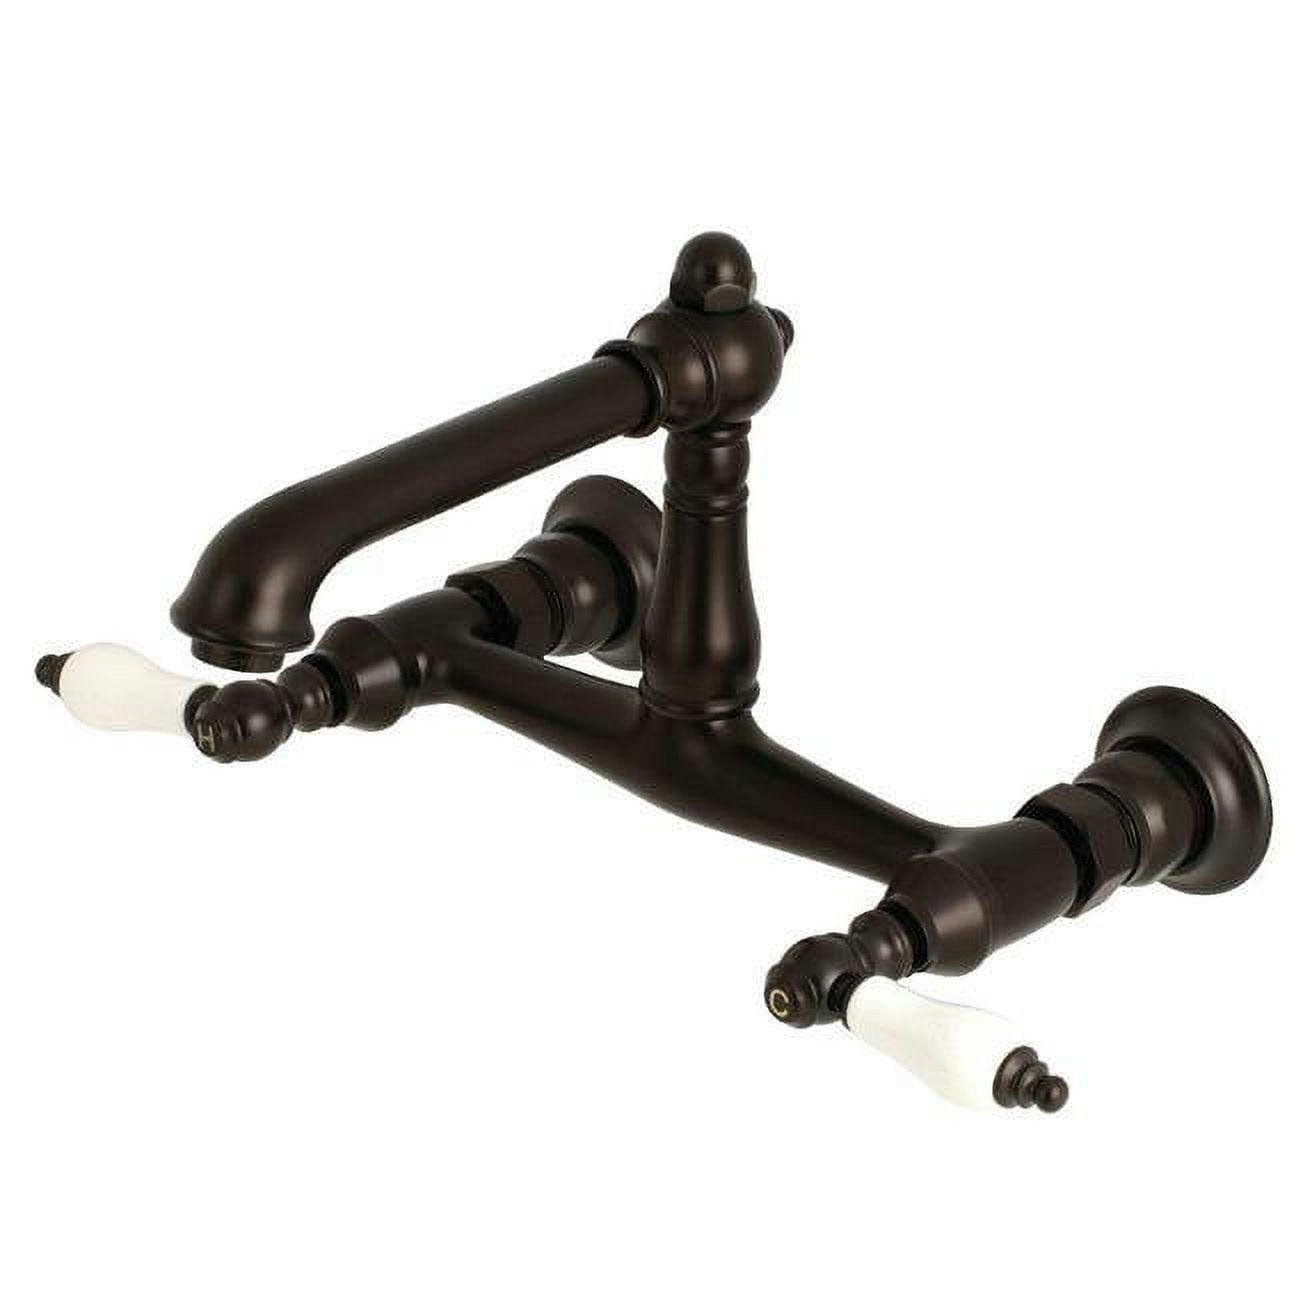 English Country Elegance Wall-Mounted Bathroom Faucet in Oil Rubbed Bronze